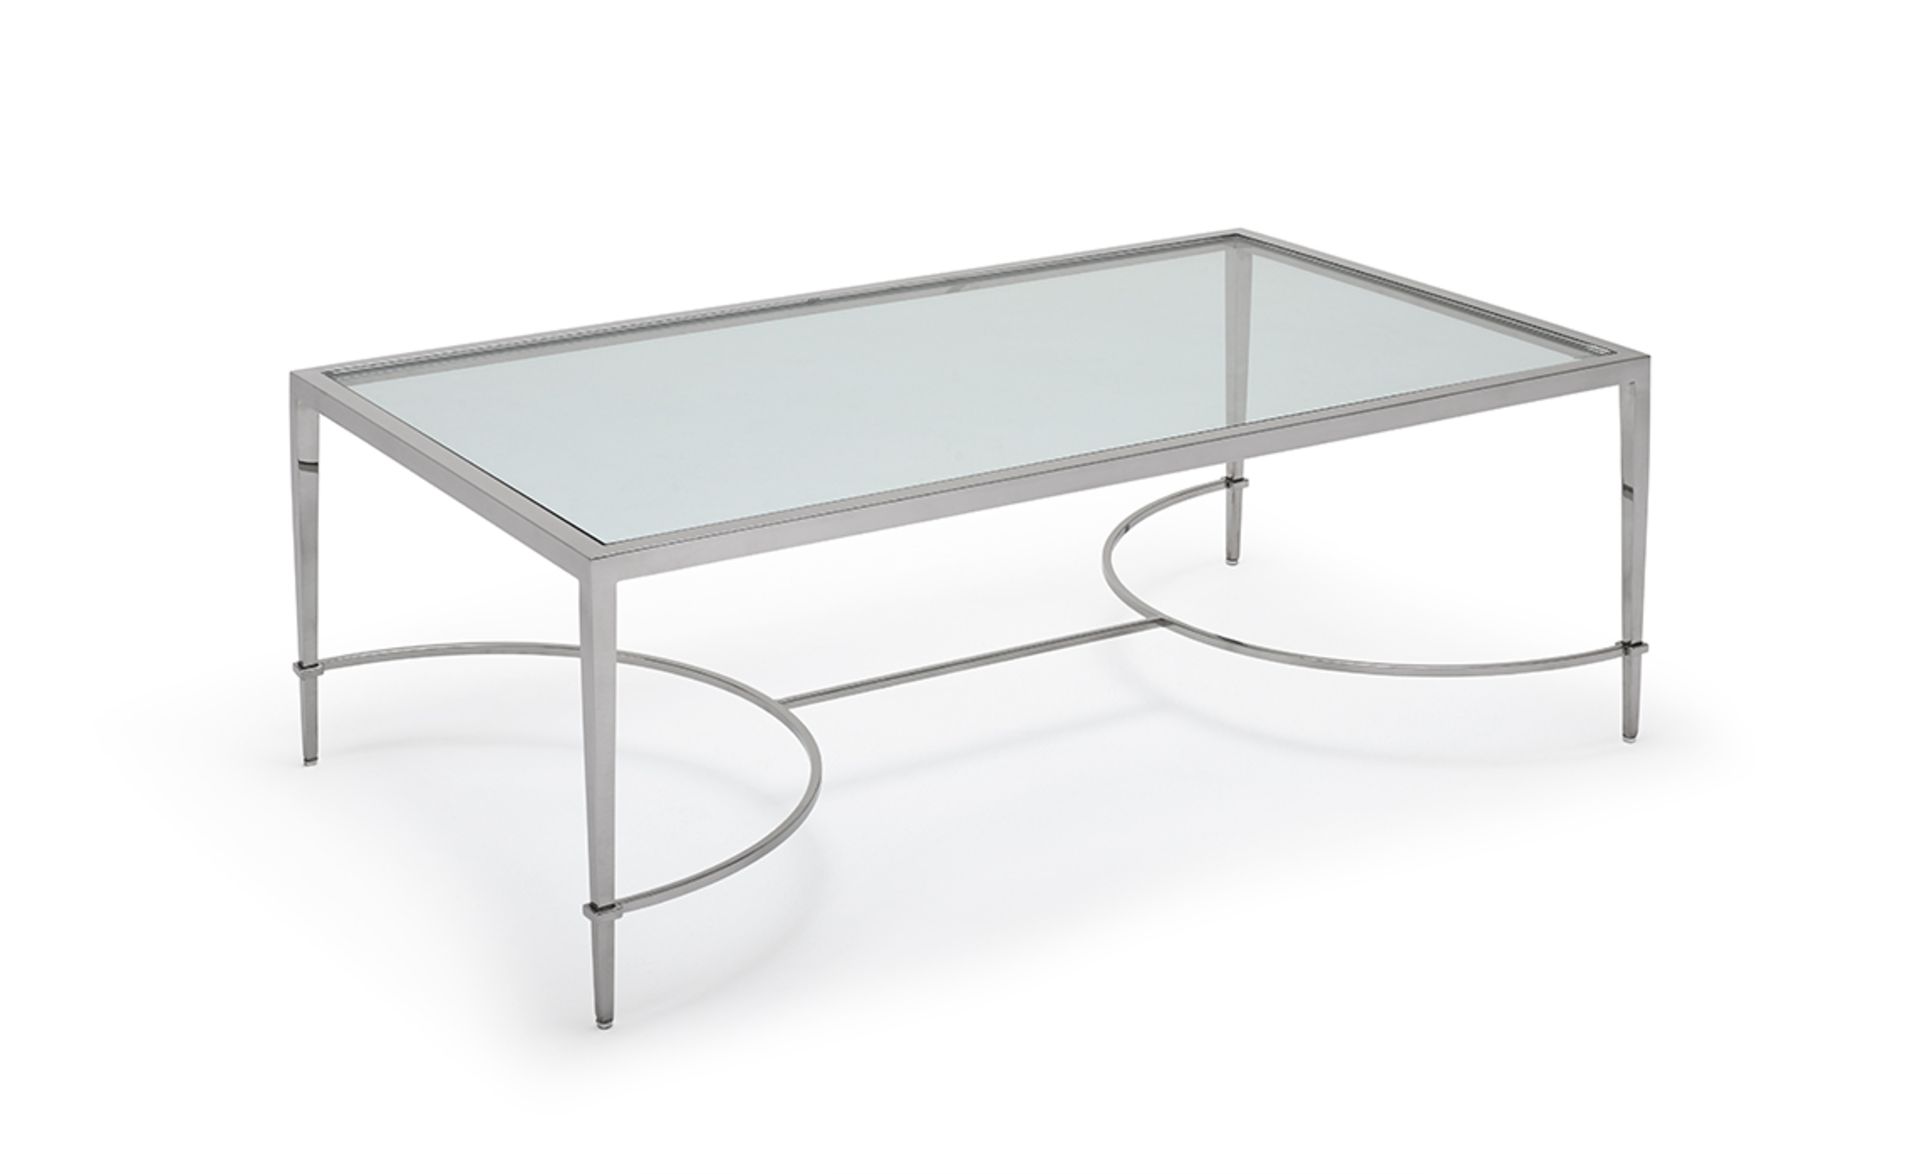 Tokyo Coffee Table by Kesterport The Tokyo coffee table with its clear glass top and a refined - Image 6 of 6